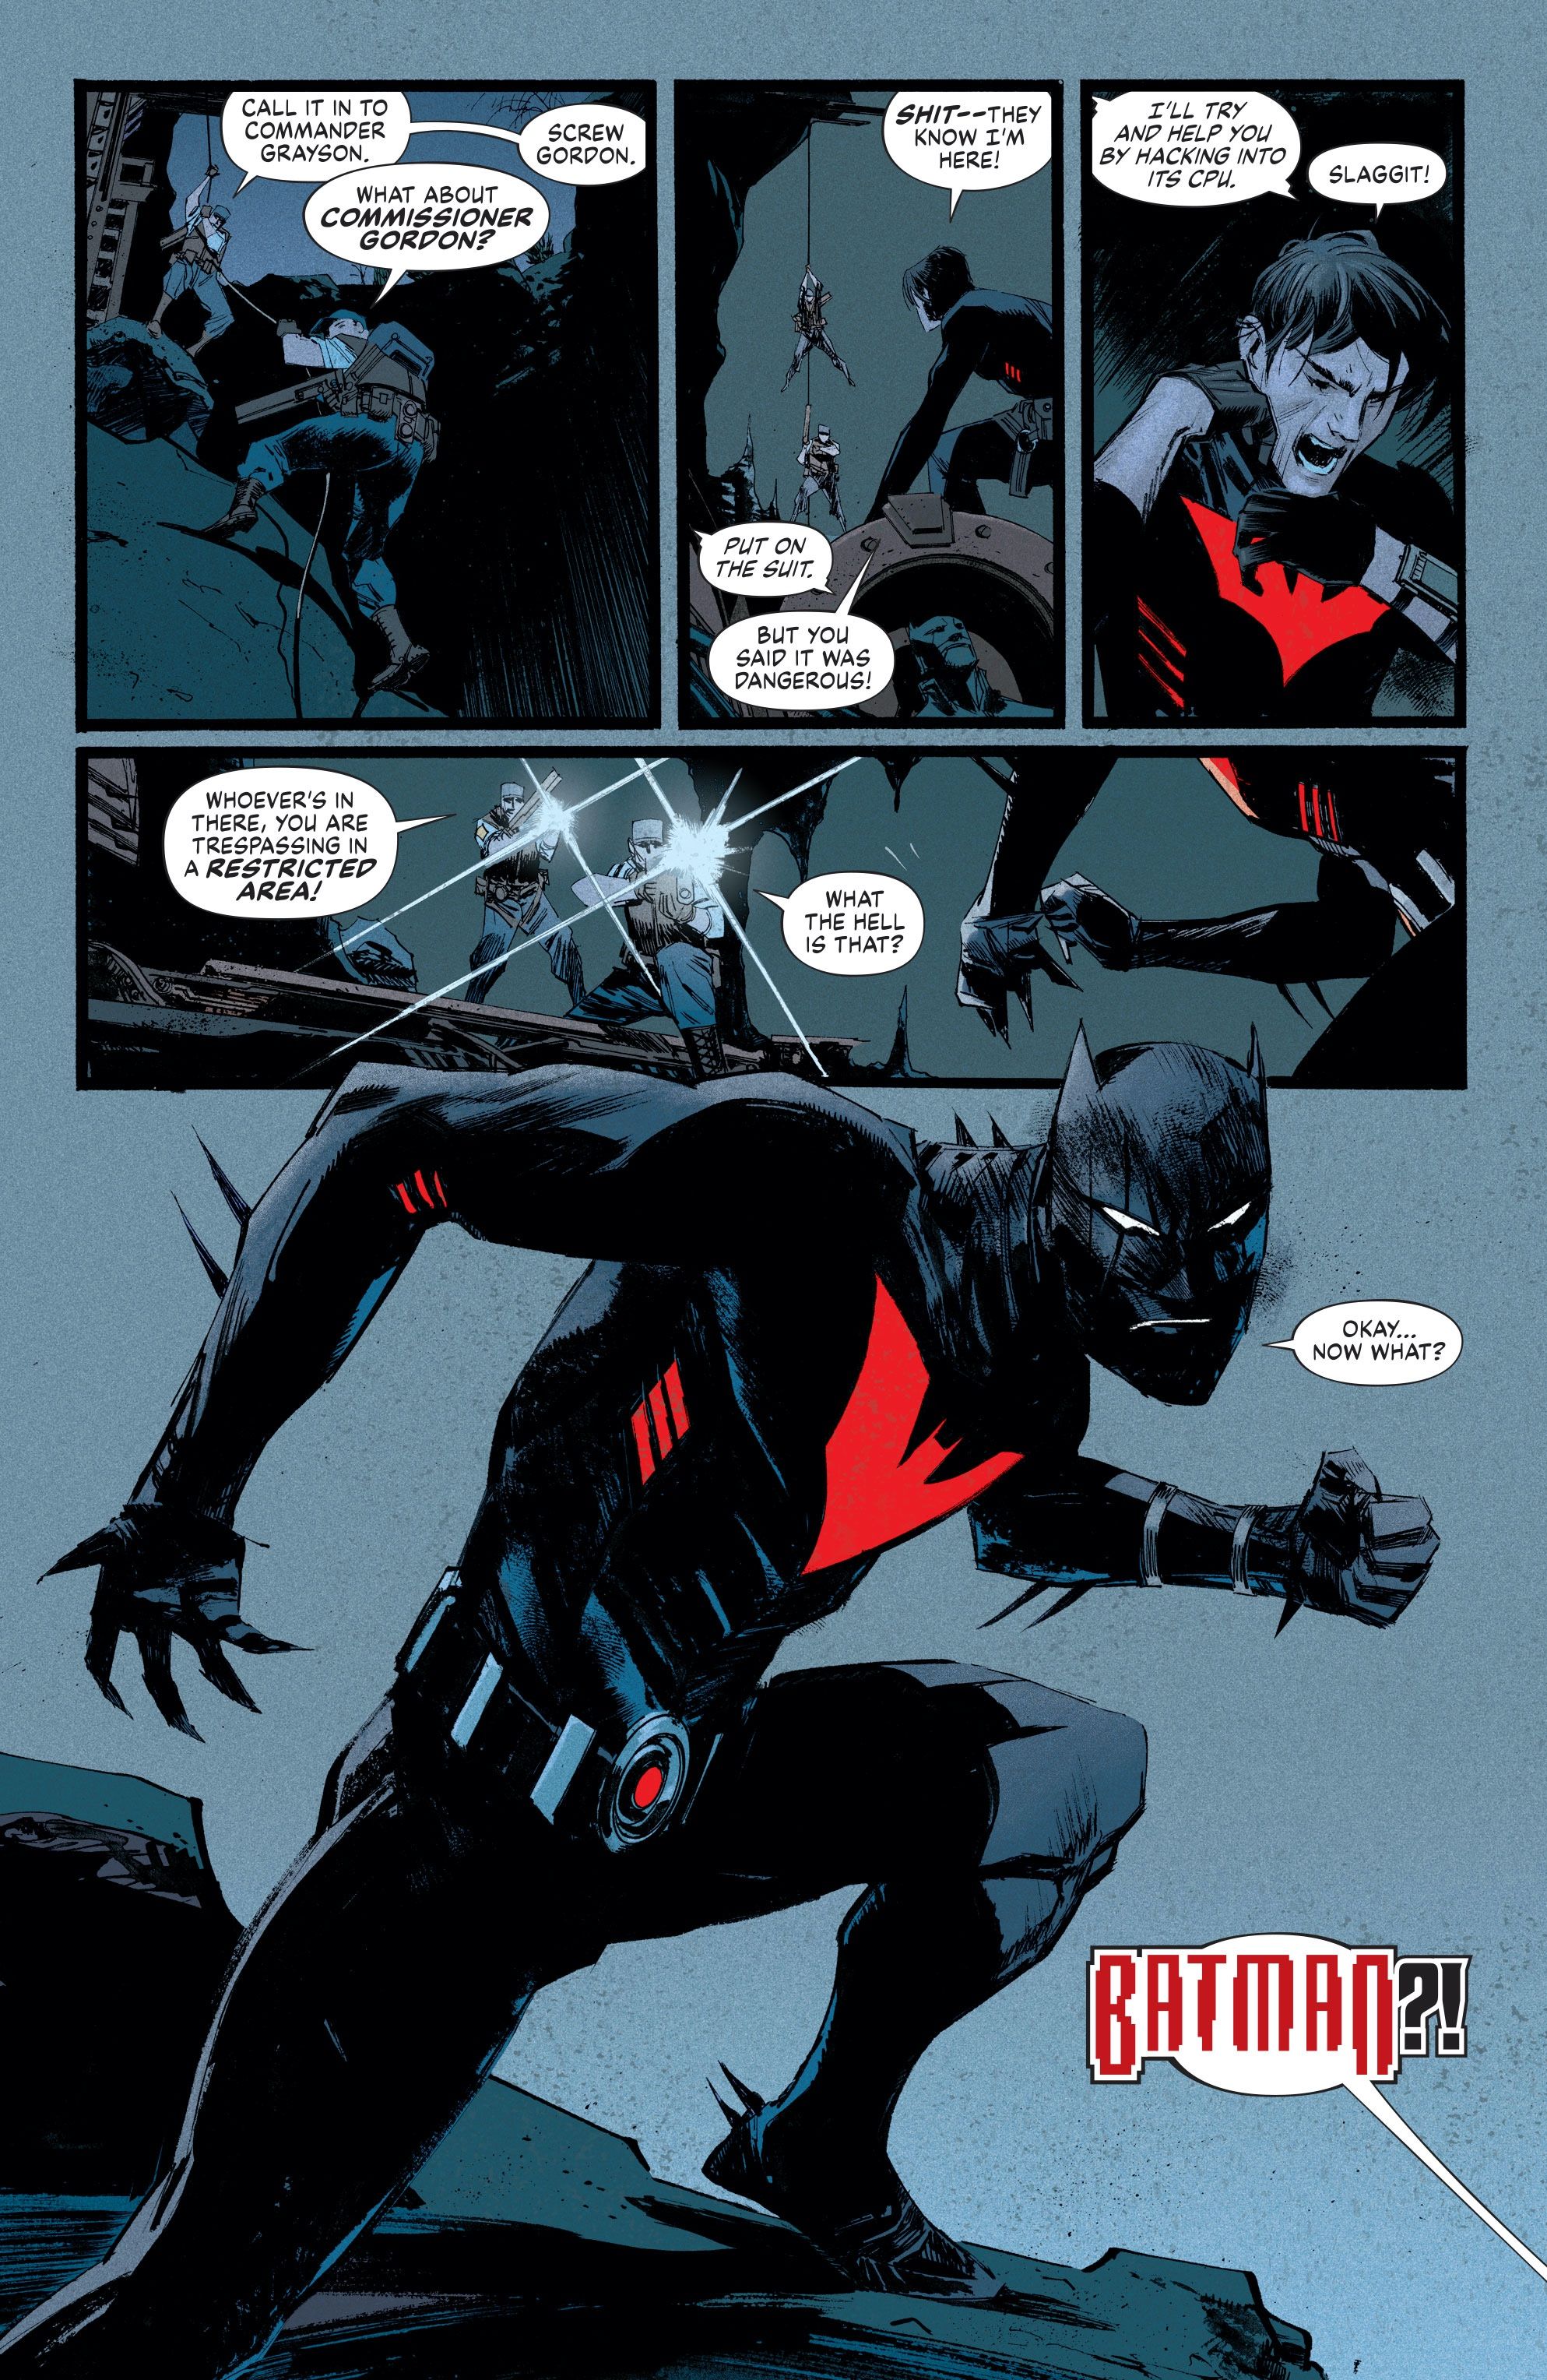 Terry McGinnis puts on the Batman Beyond suit